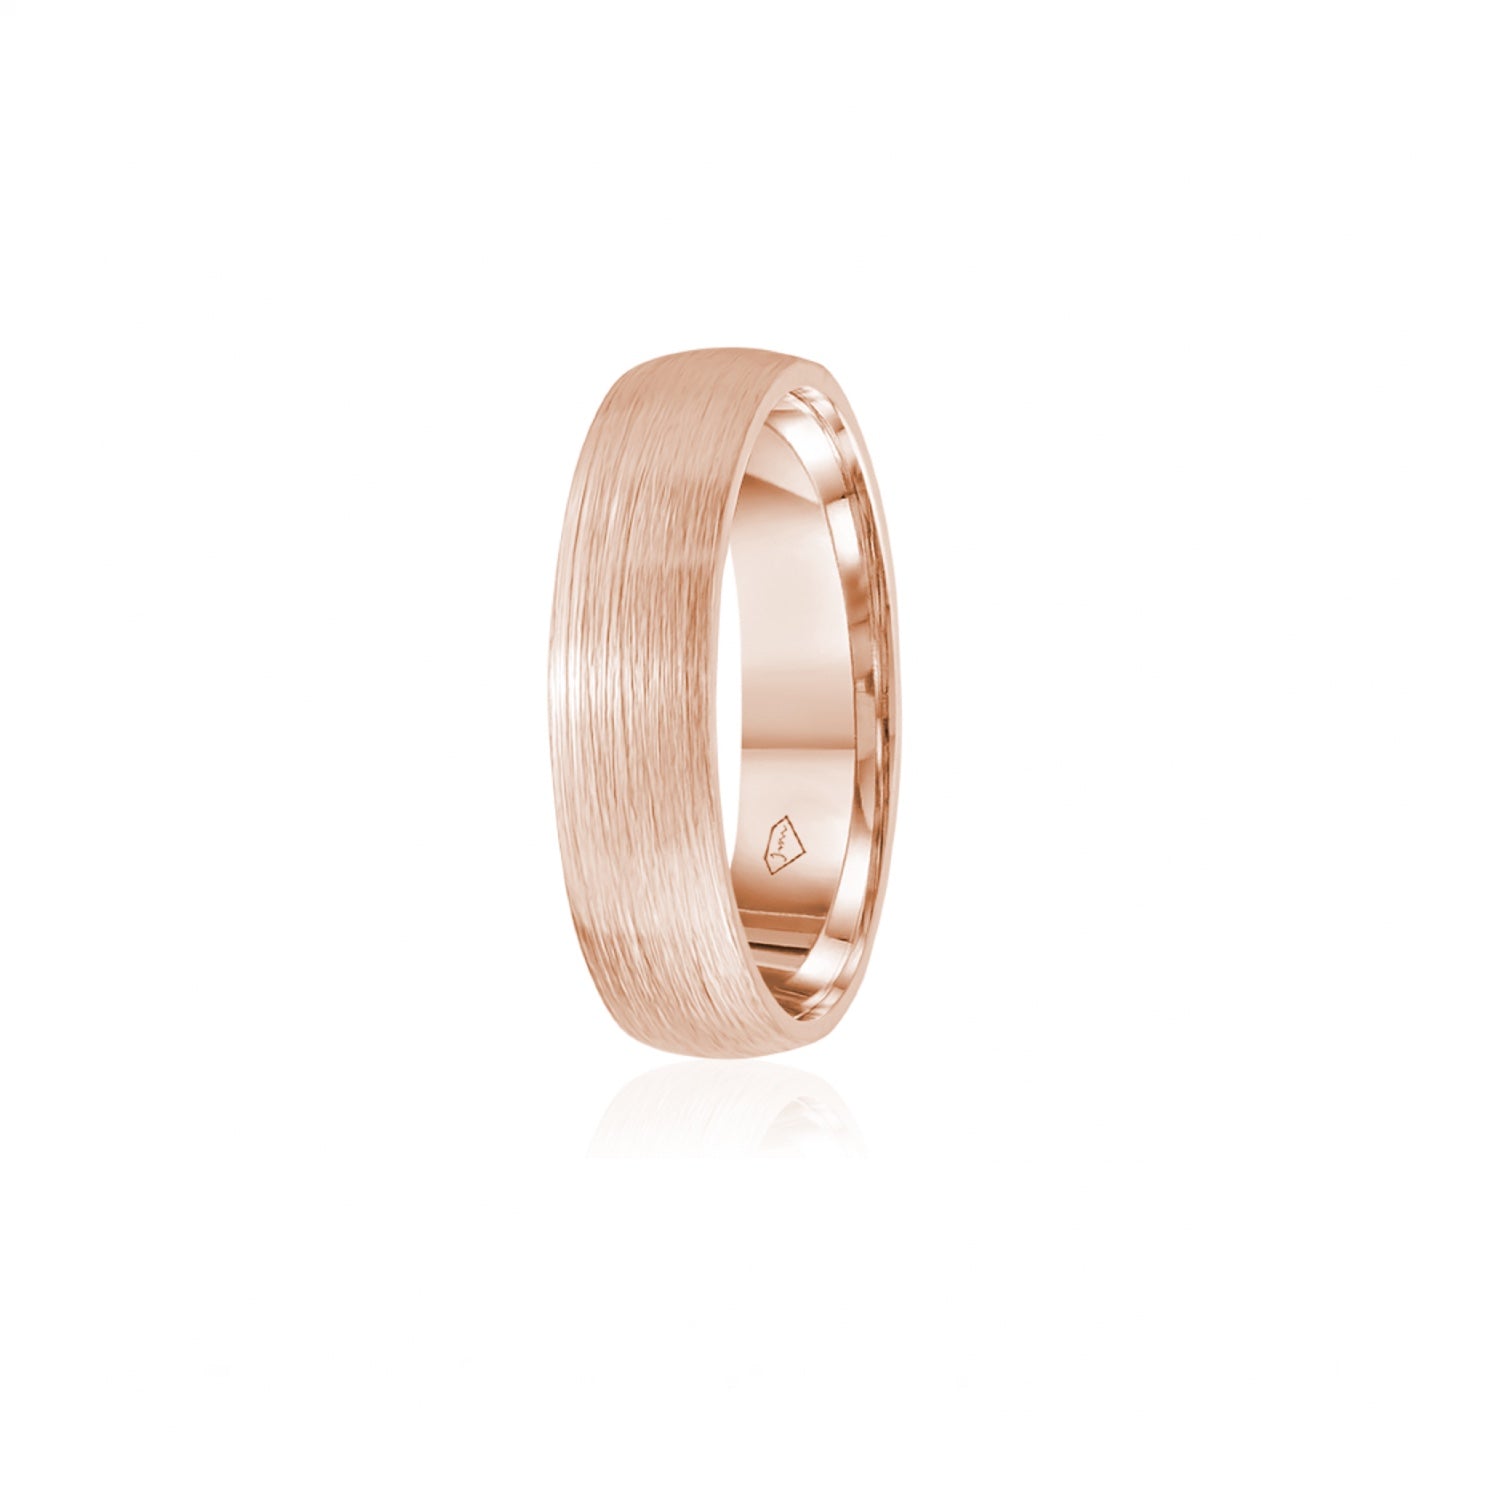 Brushed Finish Comfort Fit 8-9 mm Wedding Band in Rose Gold